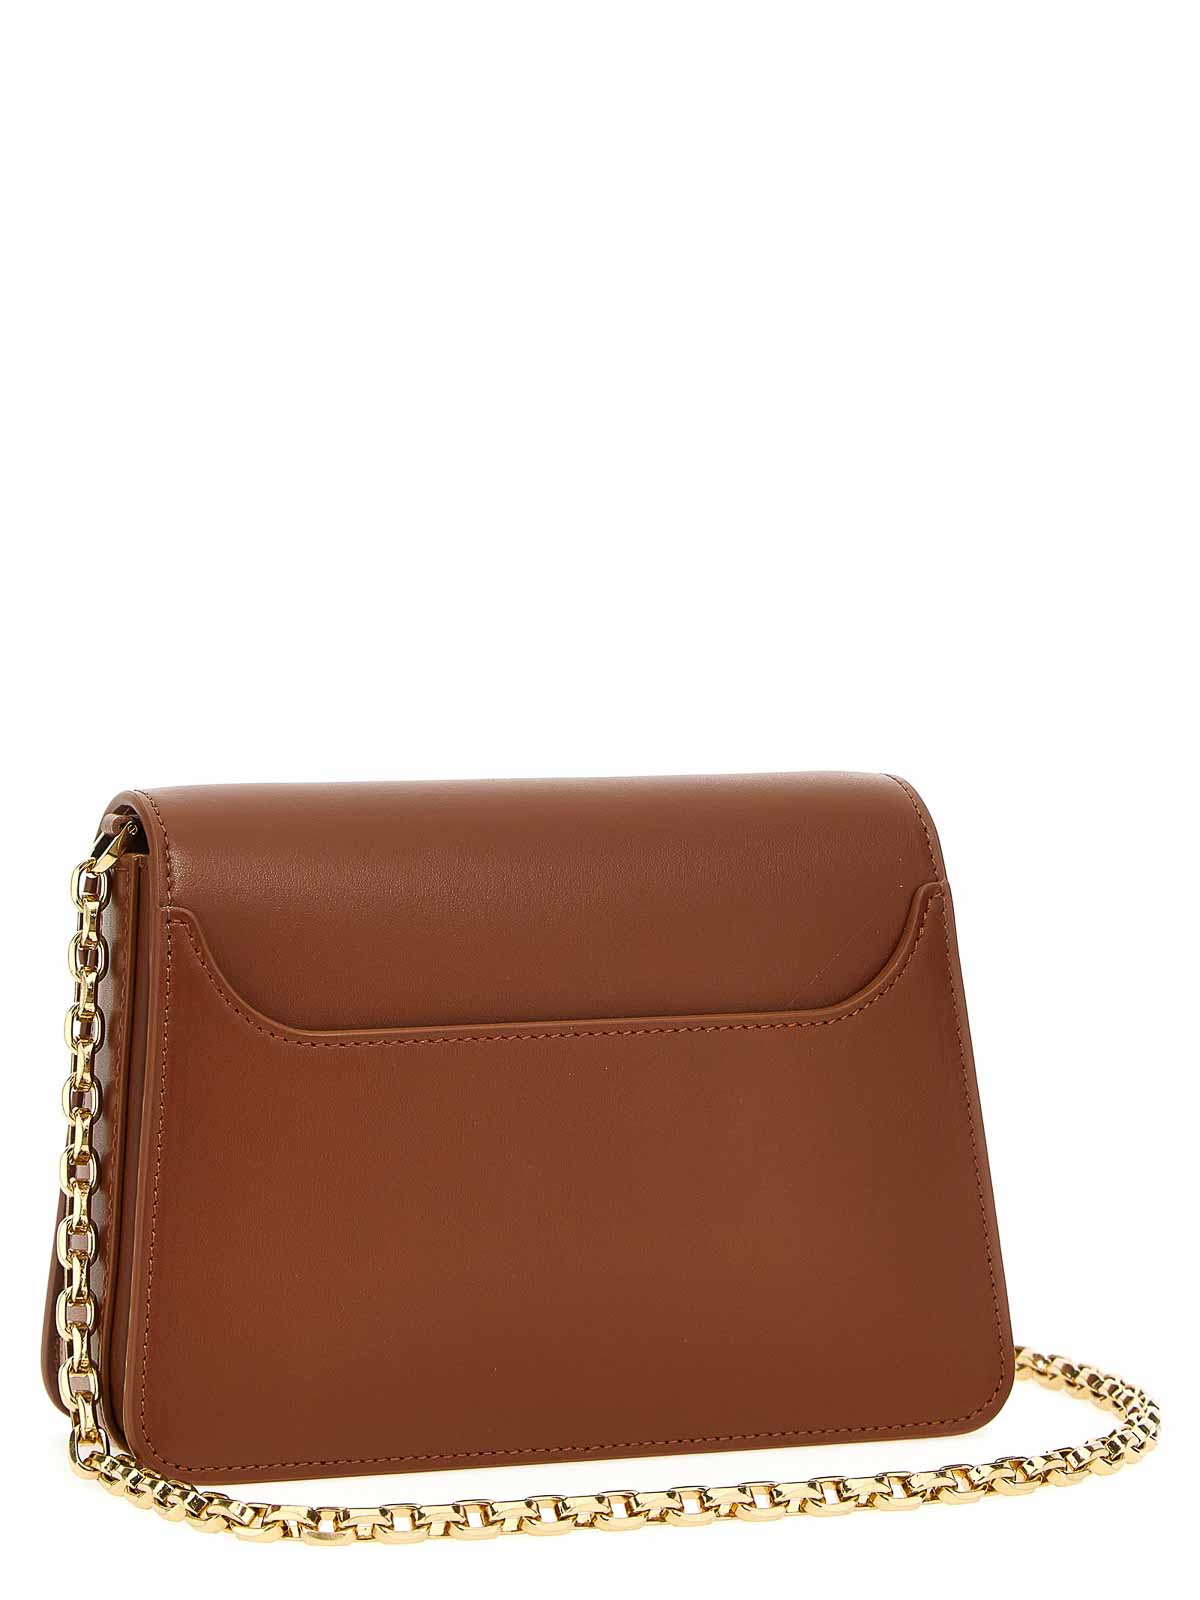 Concerto Leather Bag for Female - Red - One Size - Lanvin